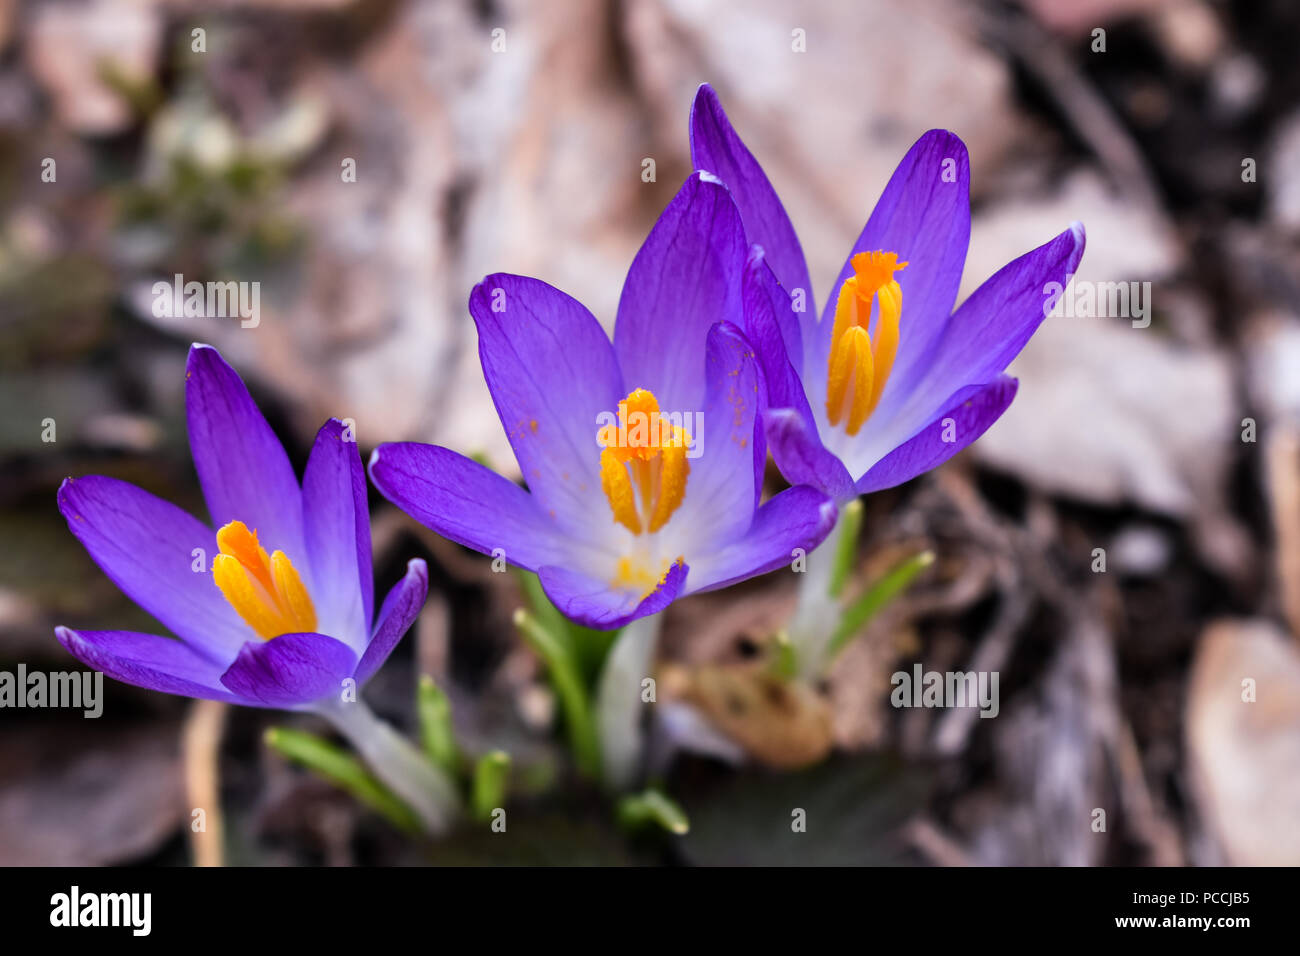 Crocus is a genus of flowering plants in the iris family comprising 90 species of perennials growing from corms. Stock Photo